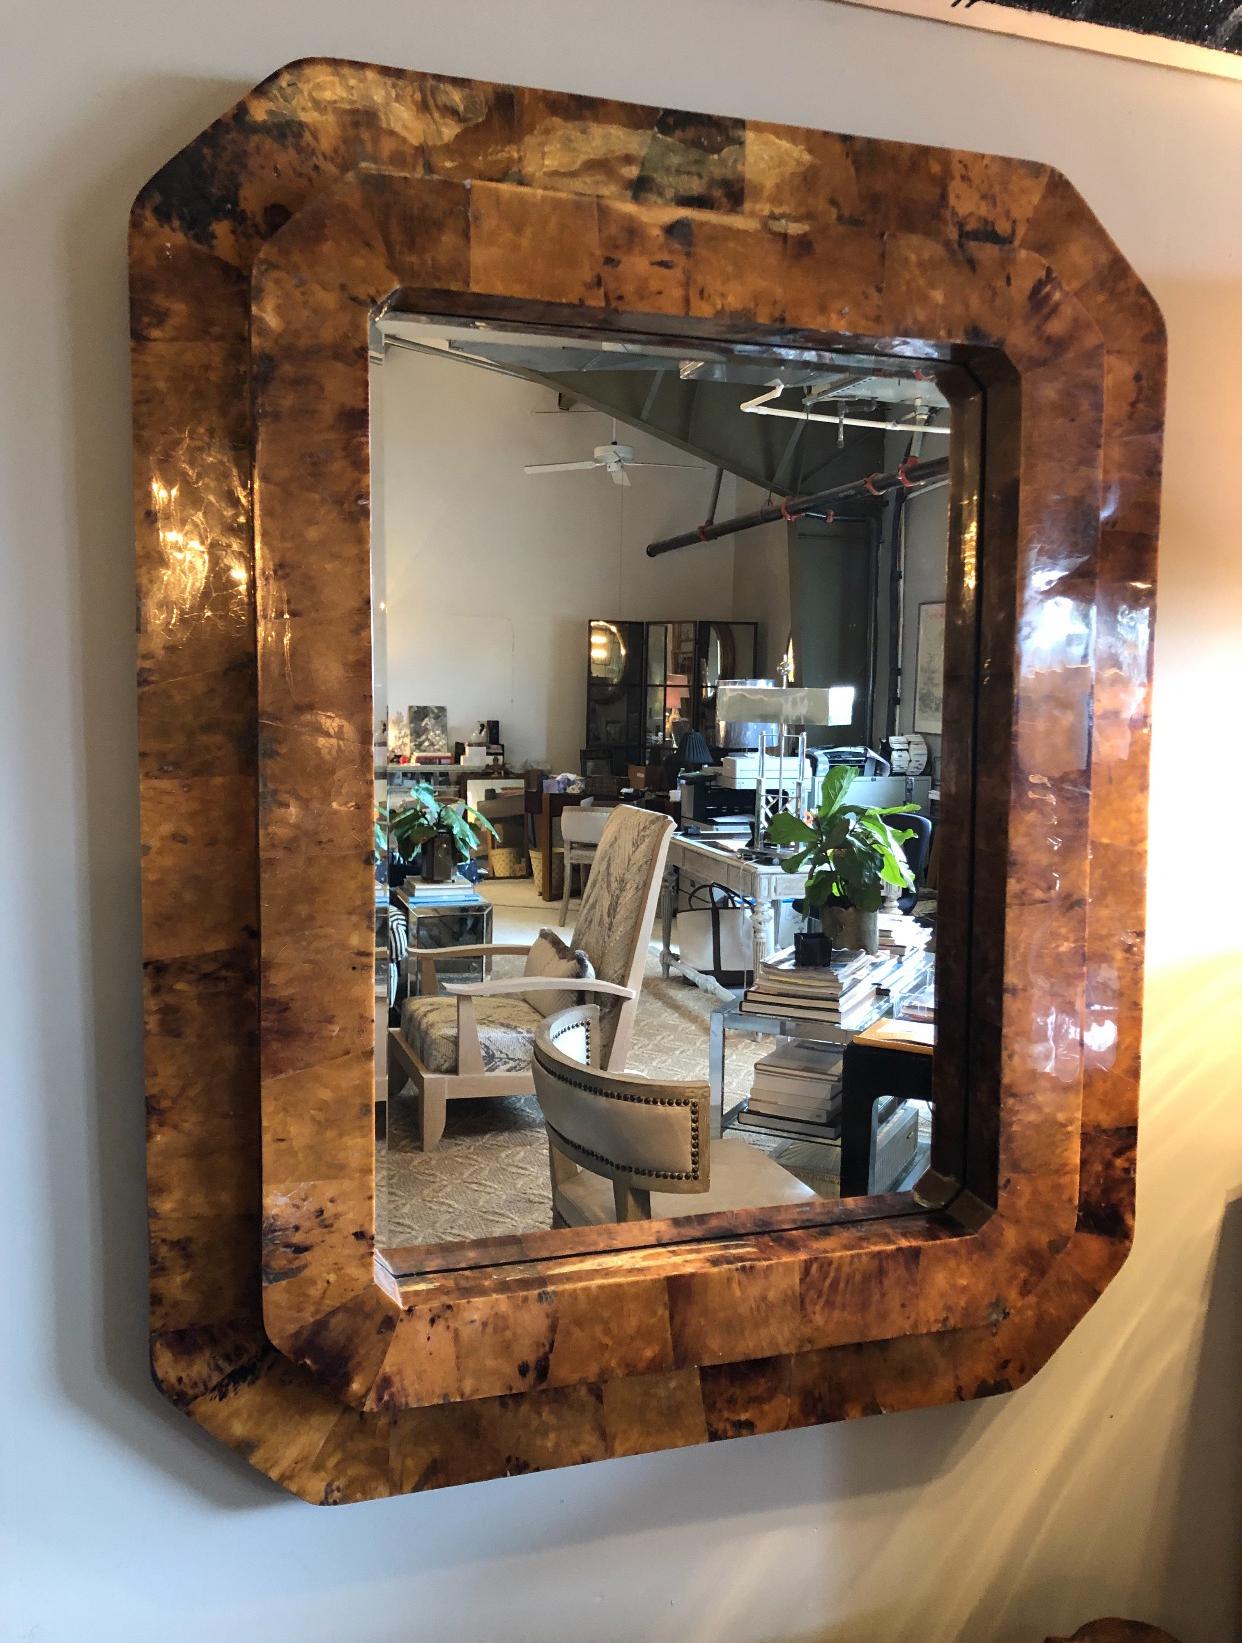 This fabulous 1980s lacquered tortoise shell mirror would look great above a fire place or in a study. It's a great masculine, vintage look.